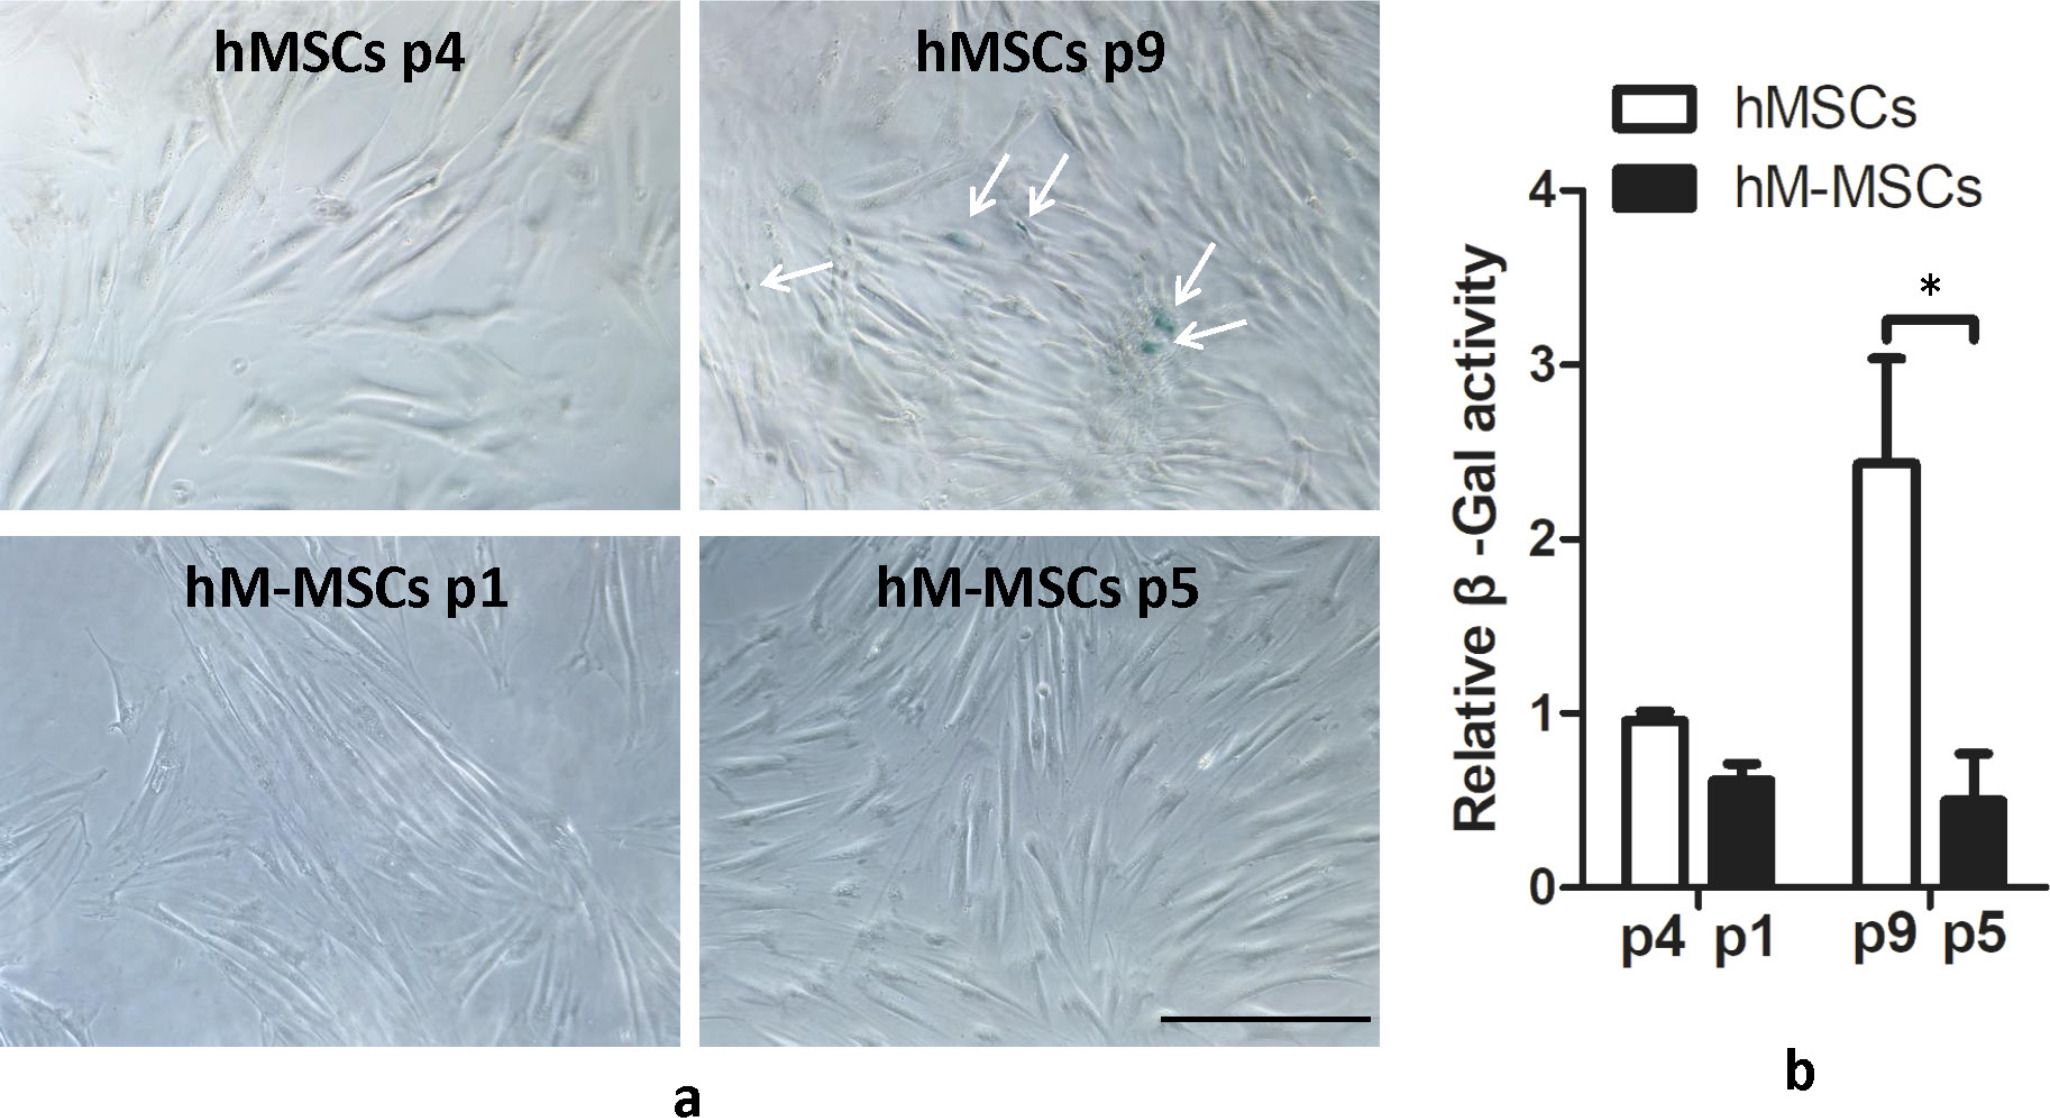 Fig. 4 
            Senescence-associated beta-galactosidase (SA‐β‐gal) activity in manipulated human mesenchymal stem cells (hM-MSCs) (passage 1 or 5) or their untreated human mesenchymal stem cells (hMSCs) controls (passage 4 or passage 9). a) Results of SA‐β‐gal staining examined by bright field microscopy. White arrows point to the β‐gal positive-stained cells. b) Quantitative results of SA‐β‐gal activity in cell lysis. The representative images shown were derived from the bone marrow of donor 1. The data are expressed as mean and SD (n = 2 donors with three replicates from each donor). *p < 0.01 versus hMSCs controls. Scale bar: 50 μm.
          